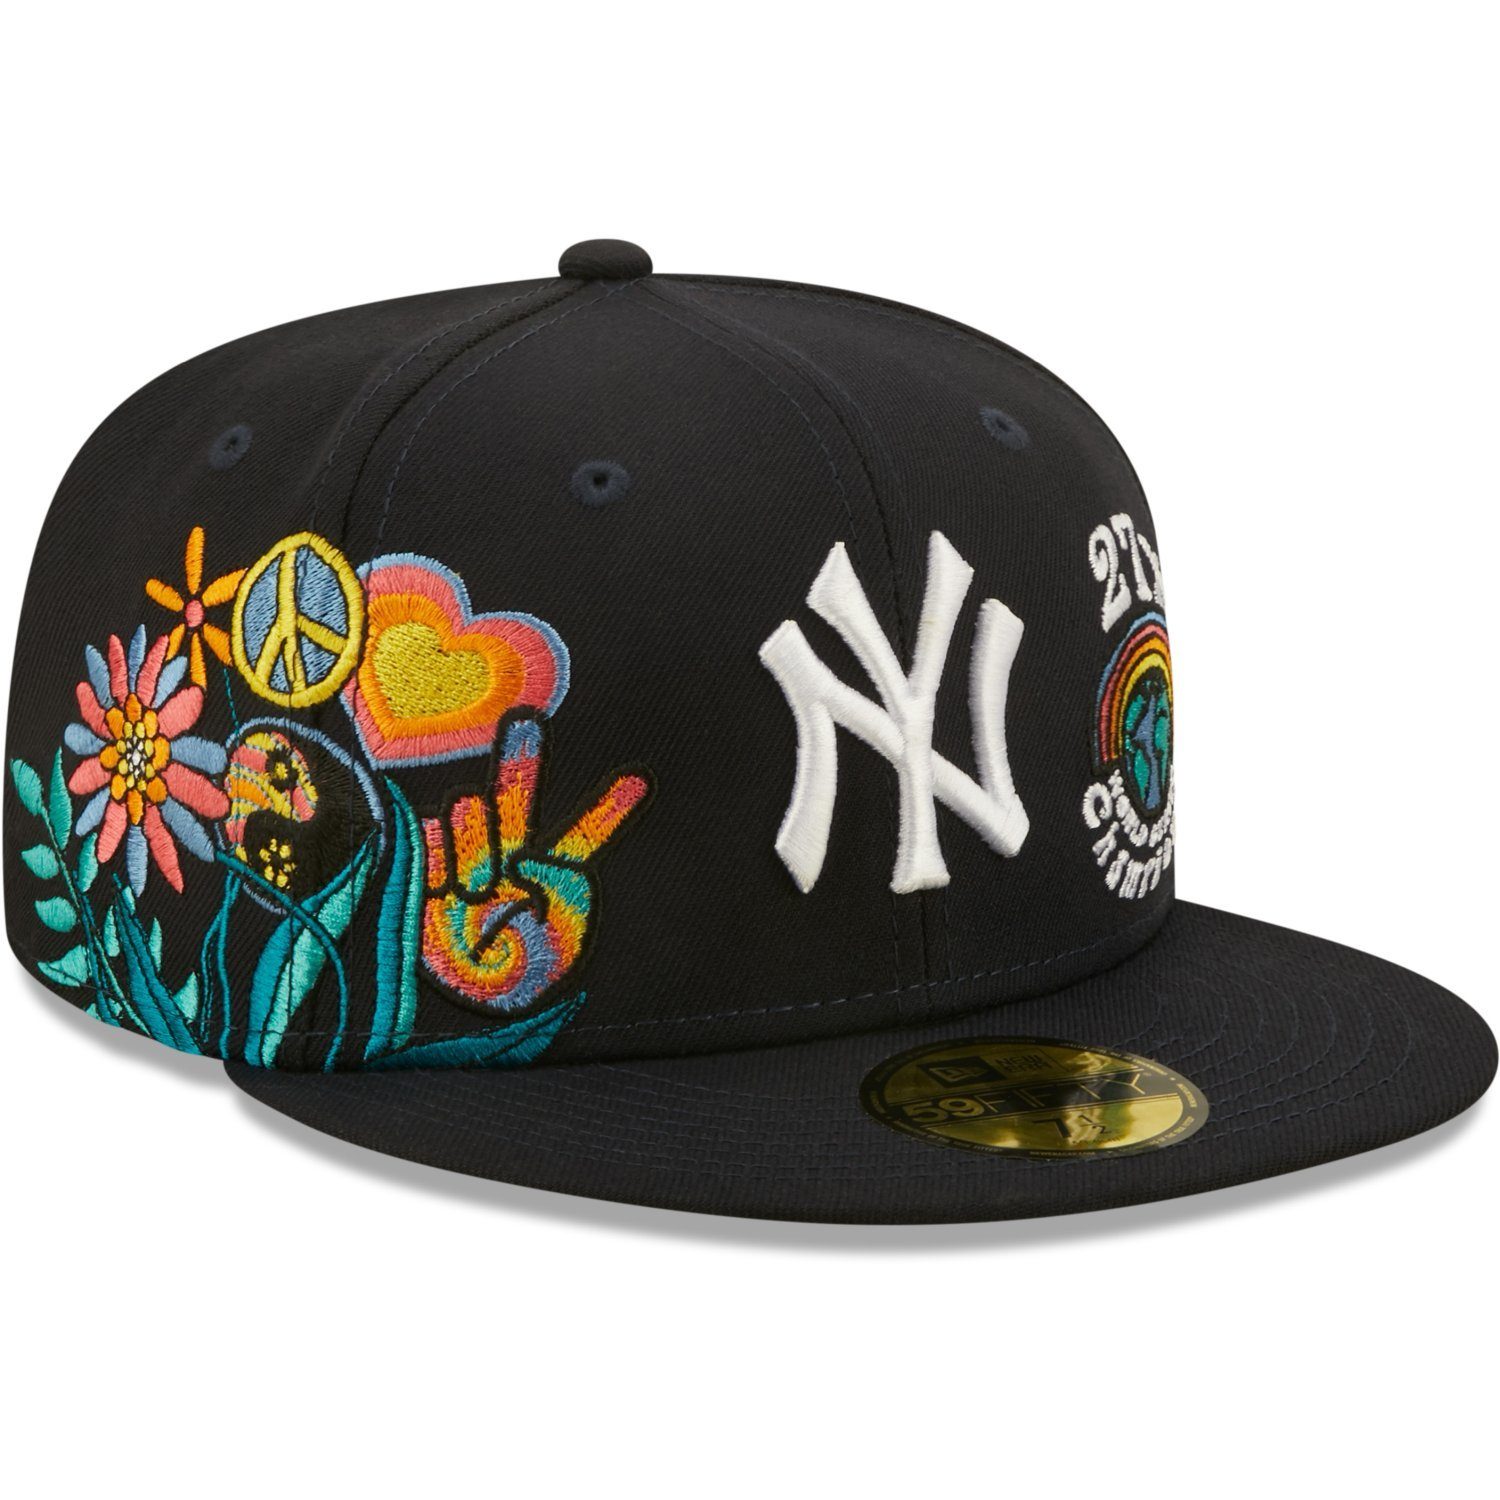 New Era Fitted Cap 59Fifty GROOVY New York Yankees